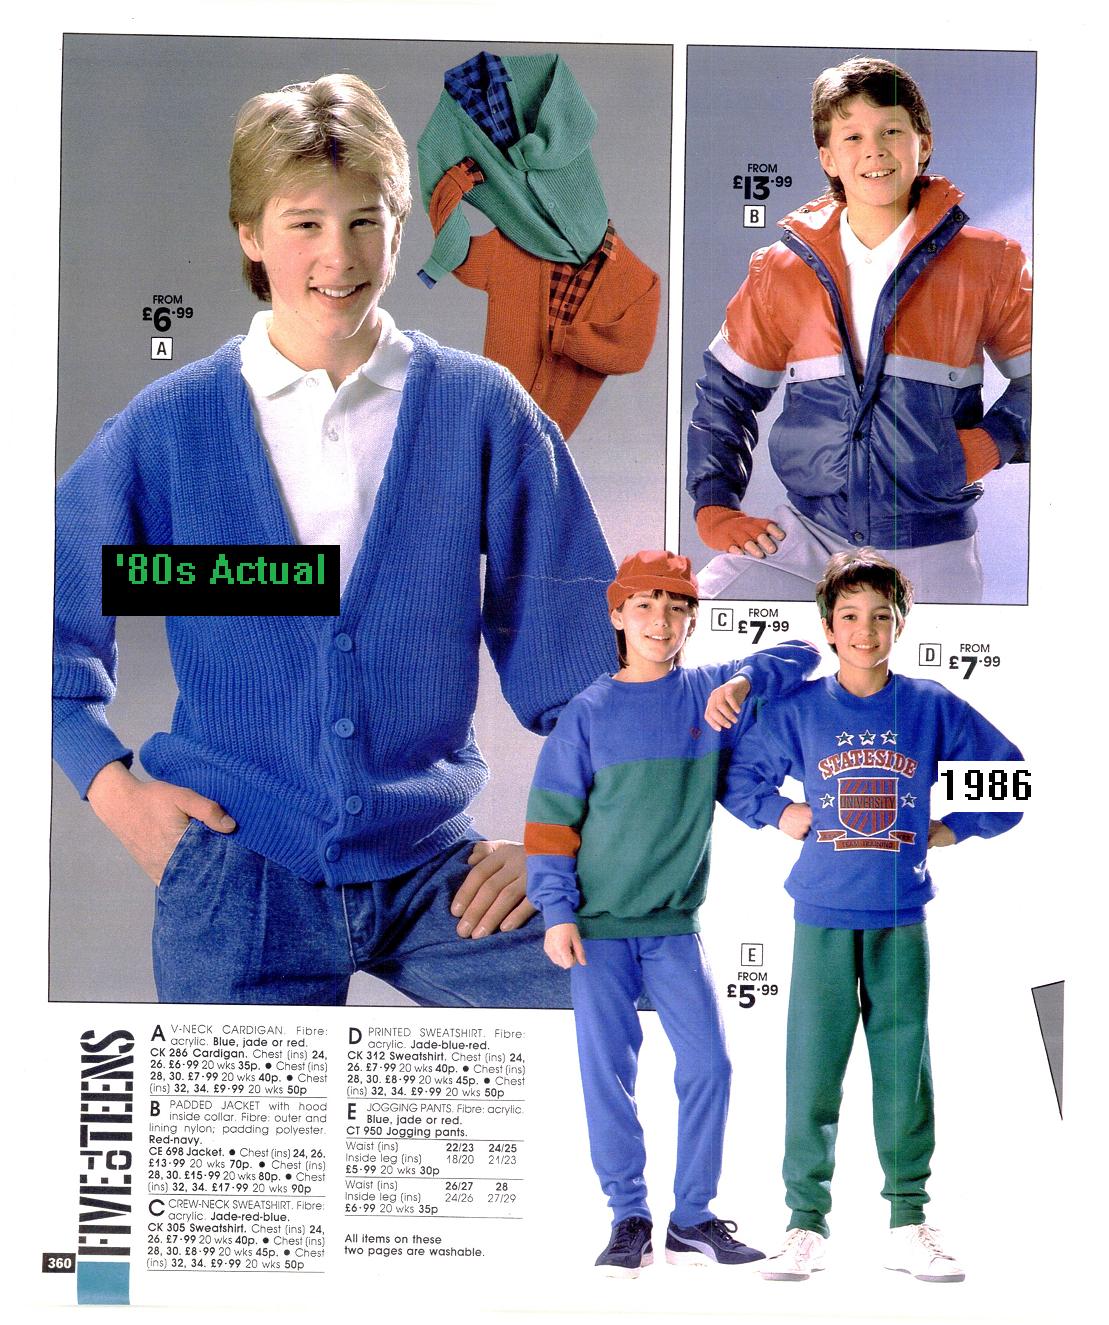 '80s Actual: 1980s Fashions... Suitable Trends For Today?